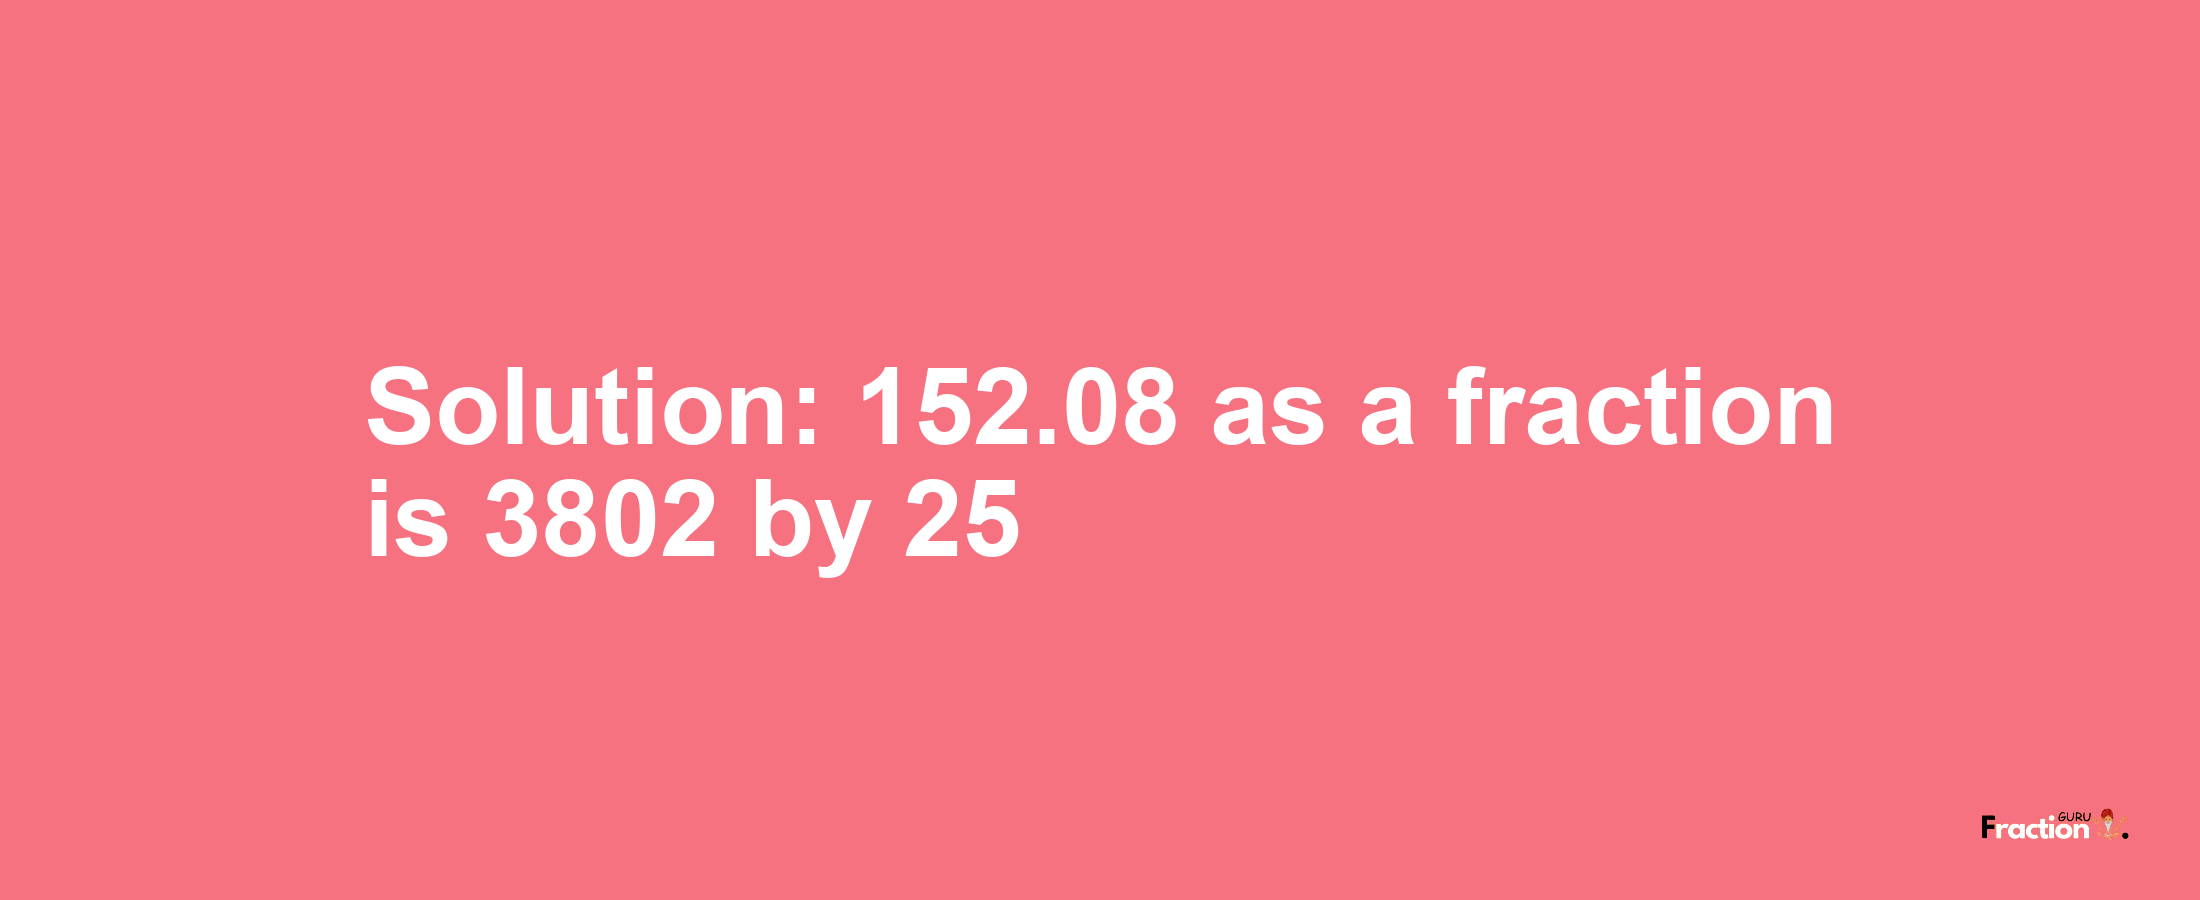 Solution:152.08 as a fraction is 3802/25